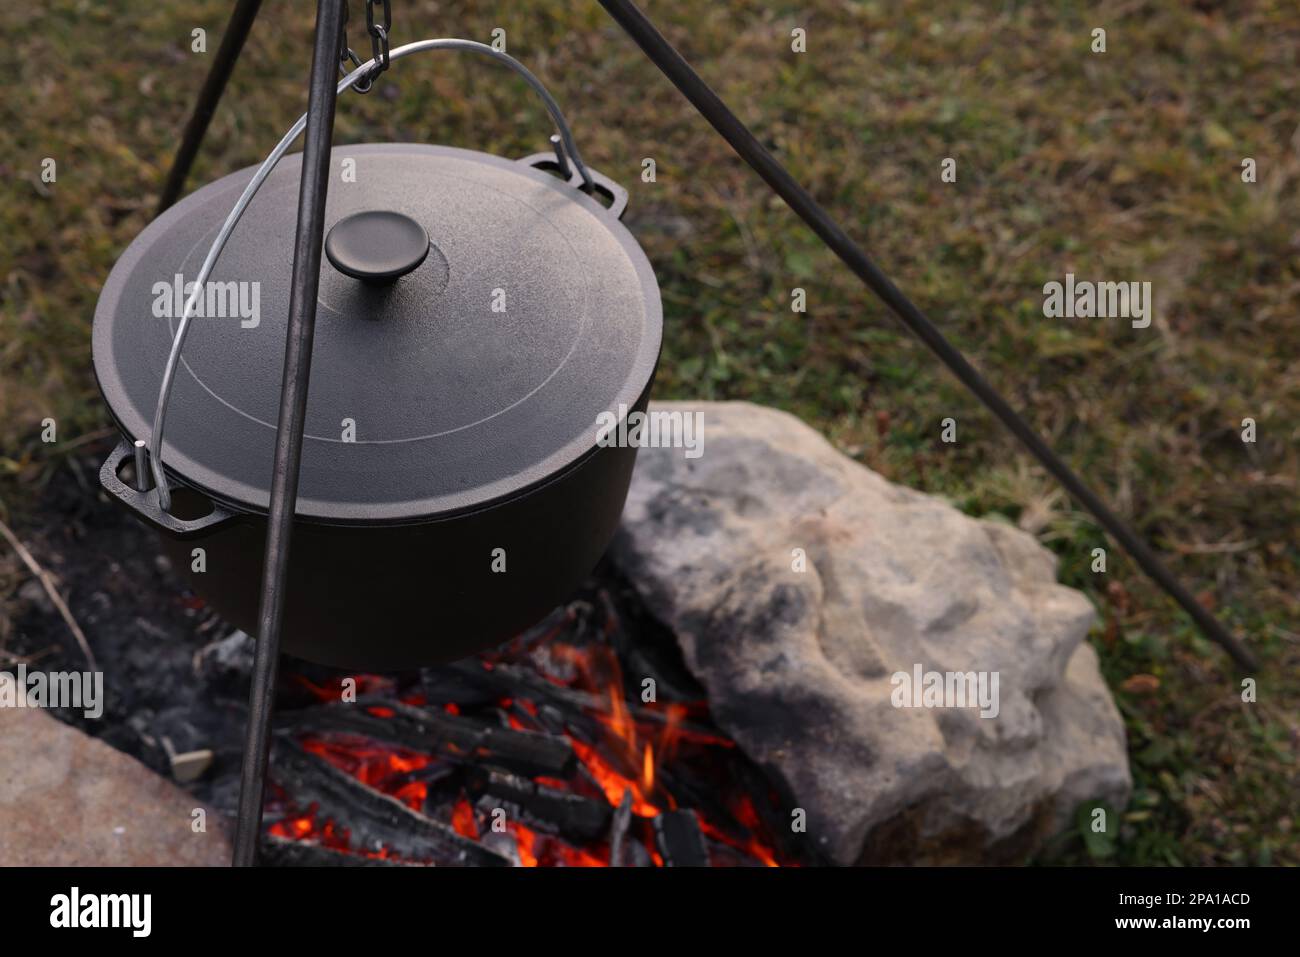 https://c8.alamy.com/comp/2PA1ACD/cooking-food-on-campfire-outdoors-camping-season-2PA1ACD.jpg